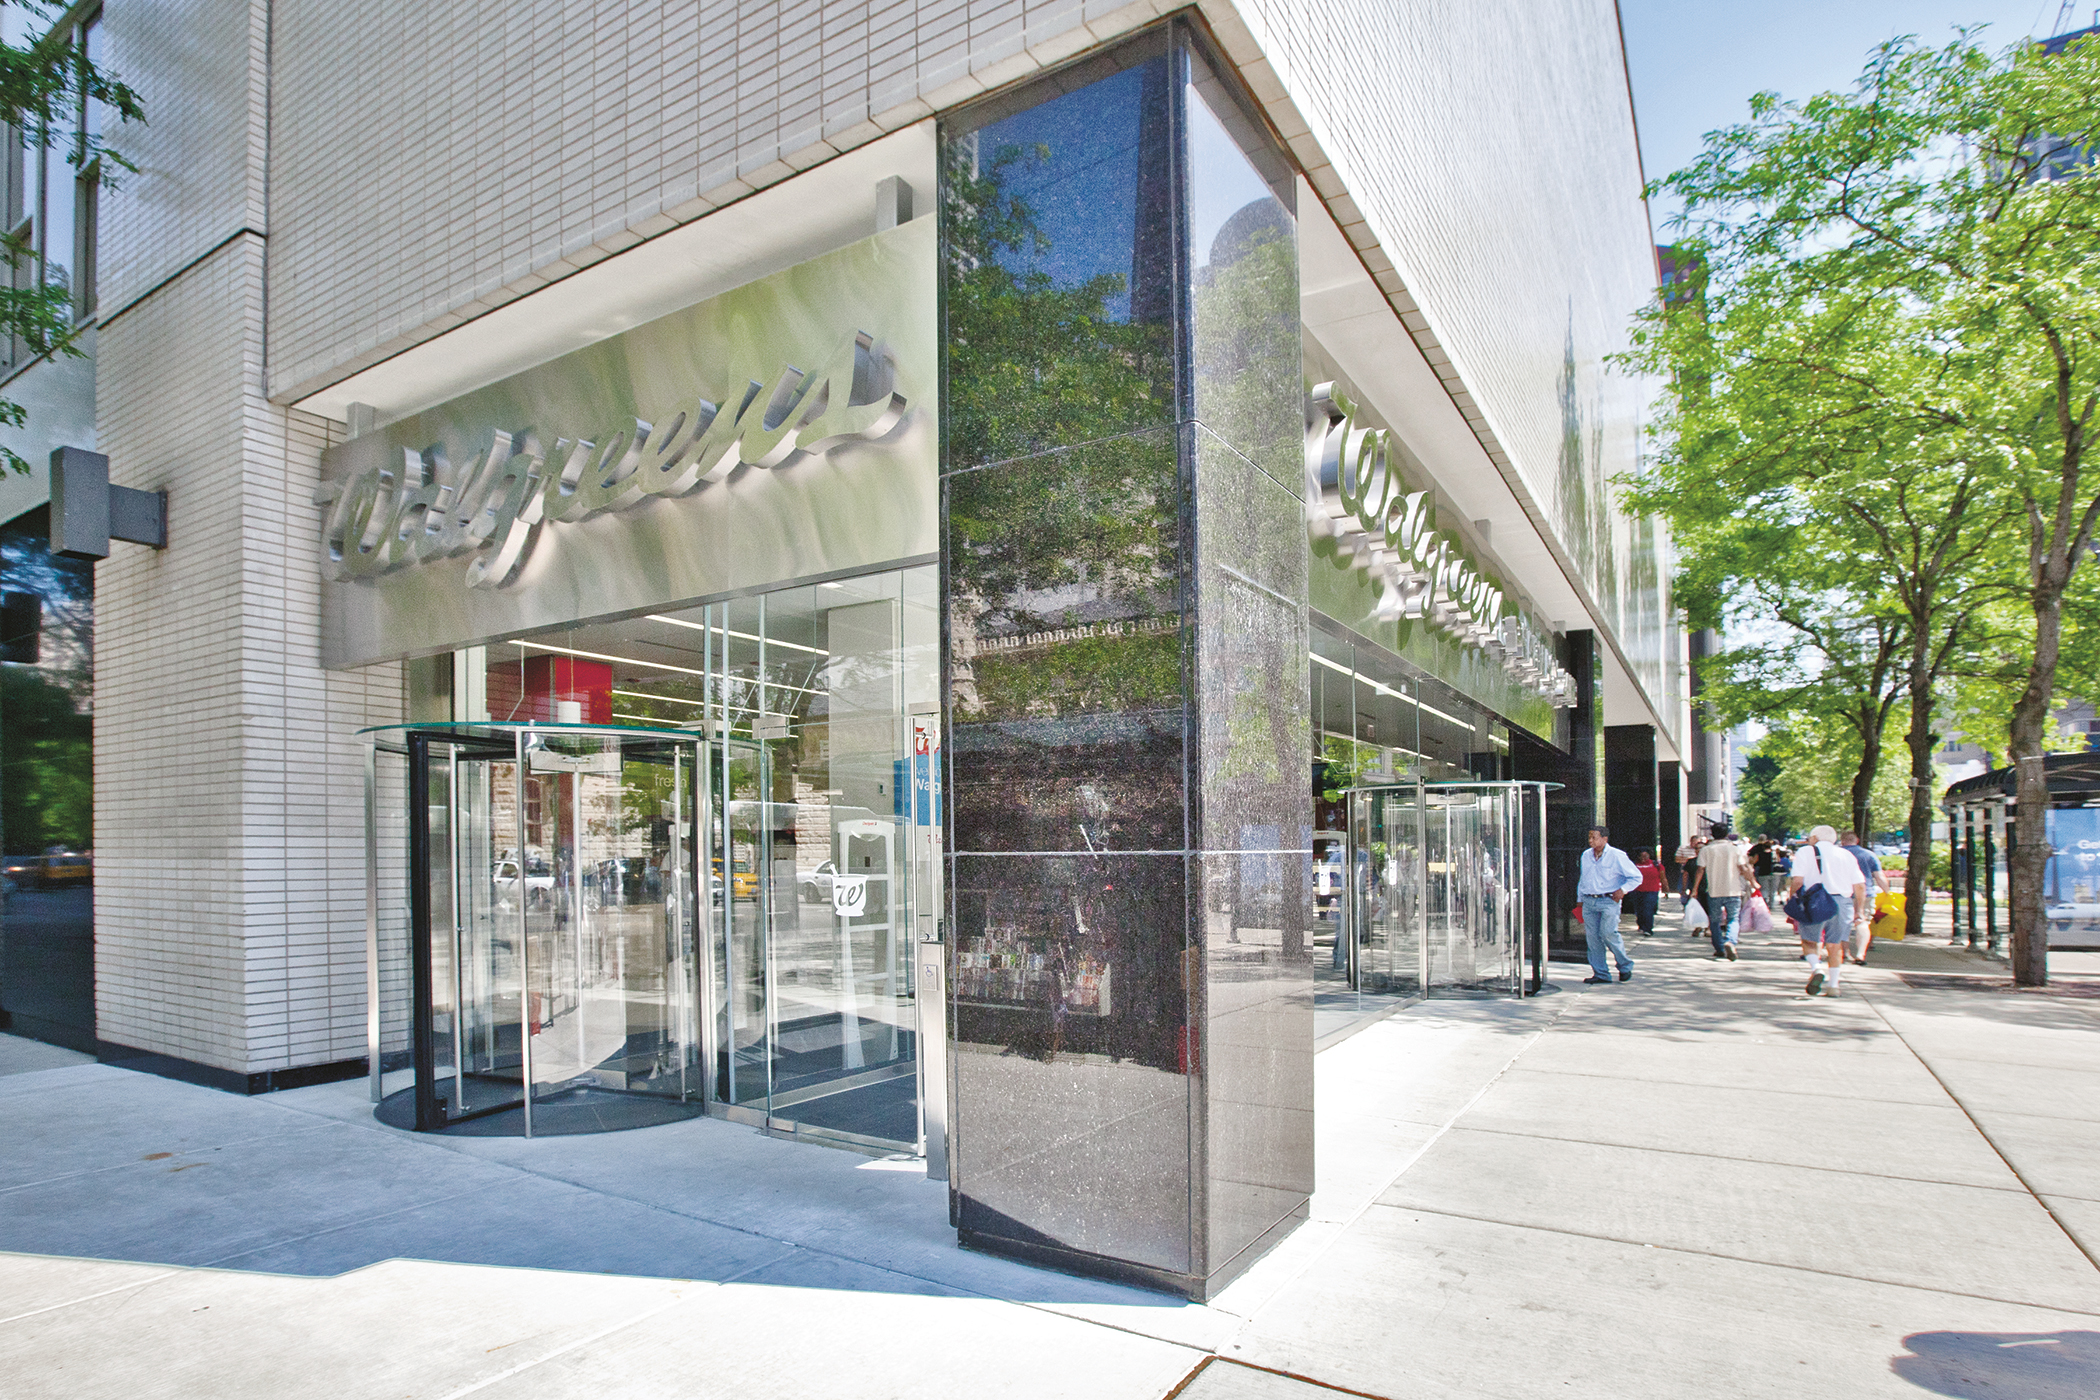 A photo of an architectural building product. An exterior entrance to a Walgreens pharmacy, at the base of a large building, showing glass revolving doors.